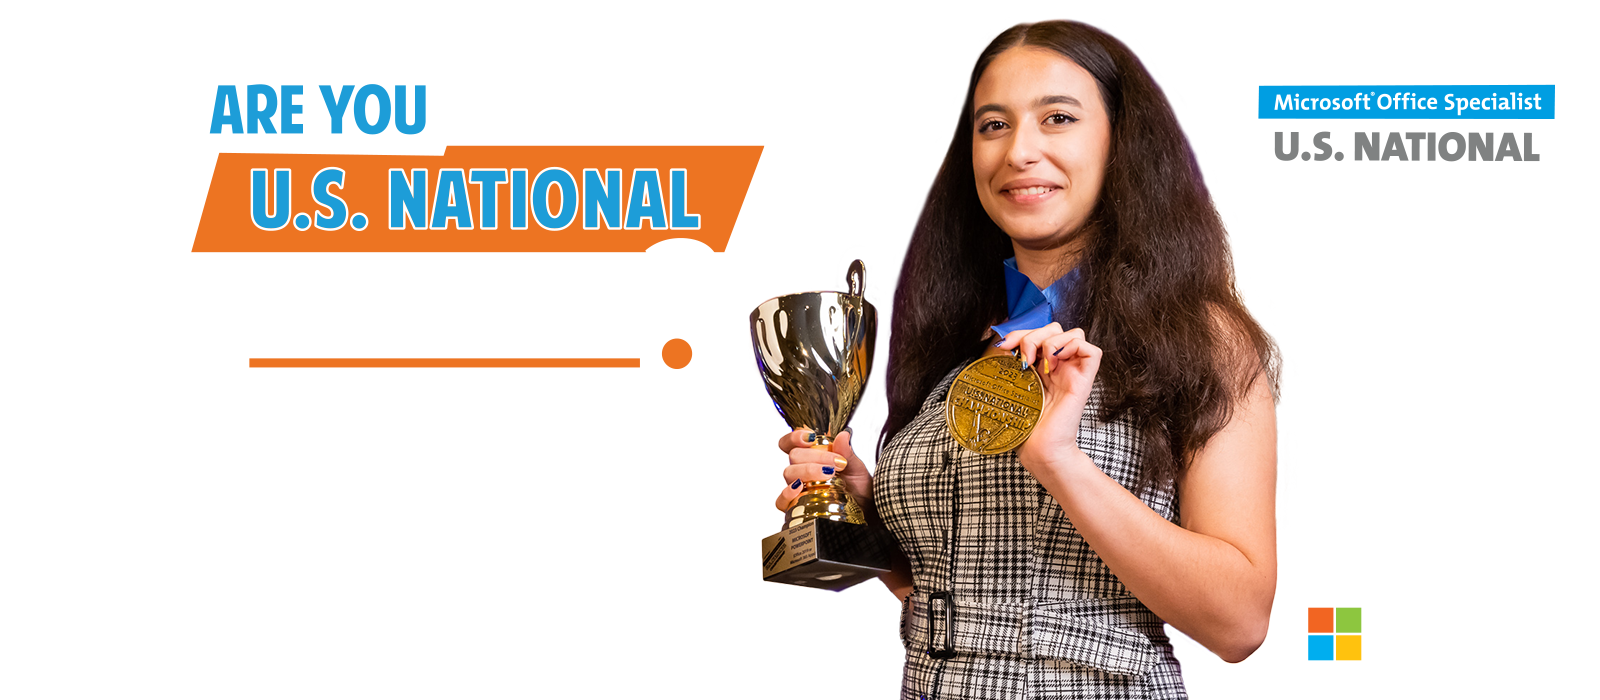 Are you the next U.S. National Champion? Certiport Microsoft Office Specialist U.S. National Championship, proudly sponsored by Microsoft